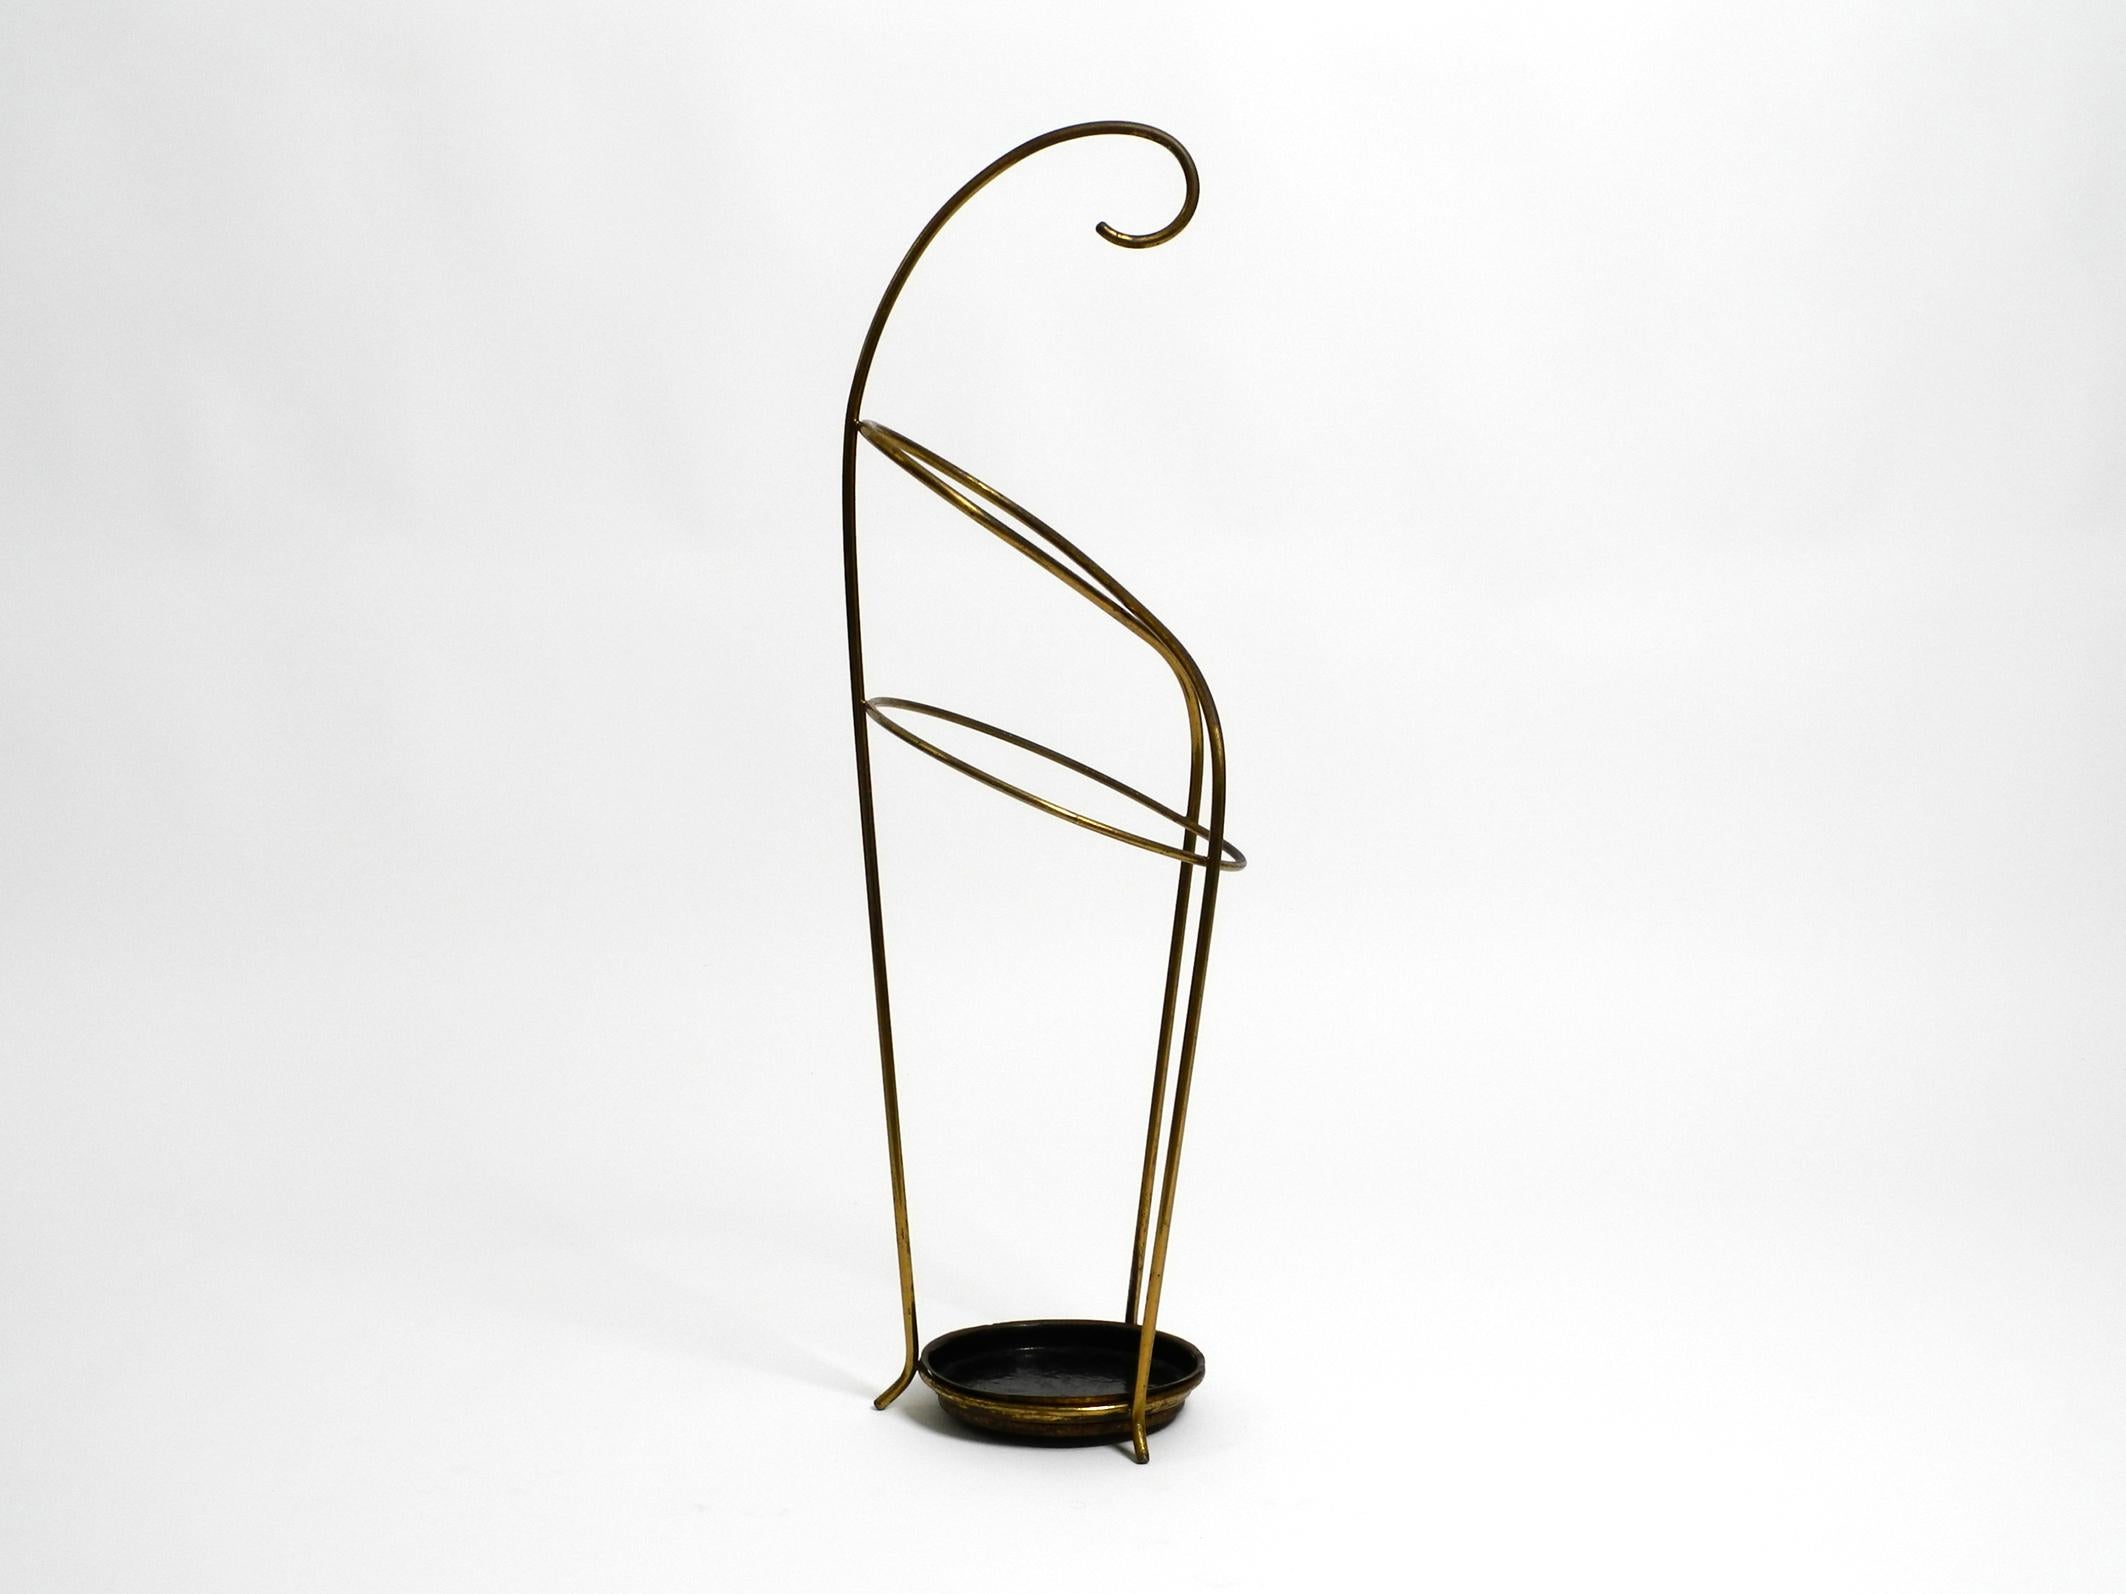 Very elegant, extraordinary Mid Century Modern umbrella stand made of brass and heavy base made of brass and cast iron.
Minimalist typical high-quality 1950s design with brass frame and black lacquered brass bowl with iron plate underneath.
Very